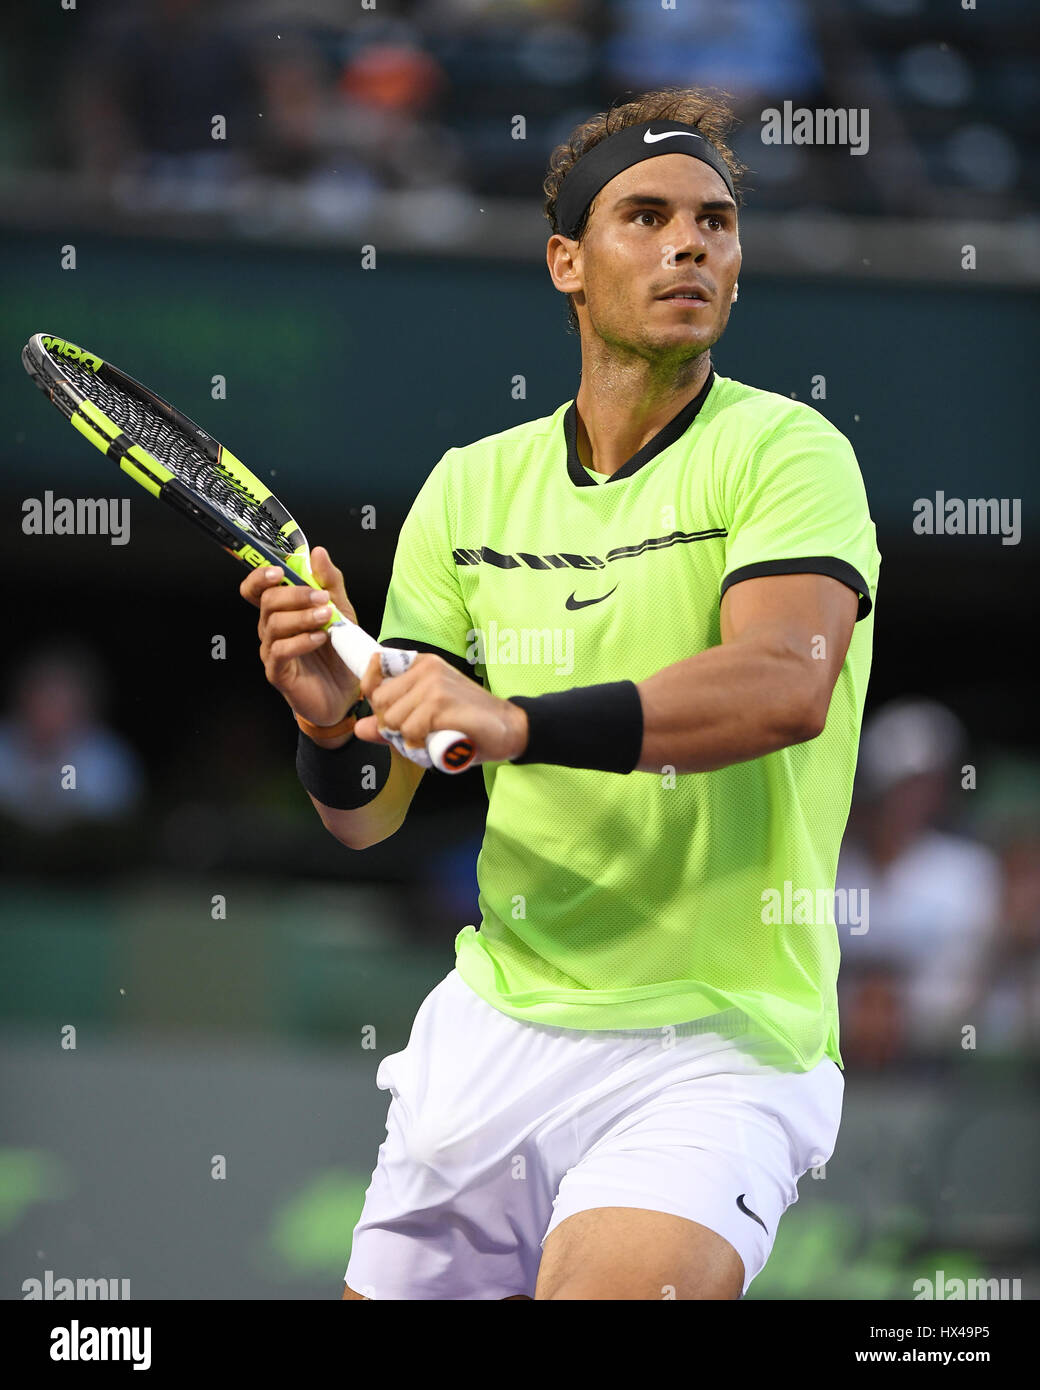 Key Biscayne, FL, USA. 24th Mar, 2017. Rafael Nadal pictured against Dubi Sela during the Miami Open at Crandon Park Tennis Center on March 24, 2017 in Key Biscayne, Florida. Credit: Mpi04/Media Punch/Alamy Live News Stock Photo